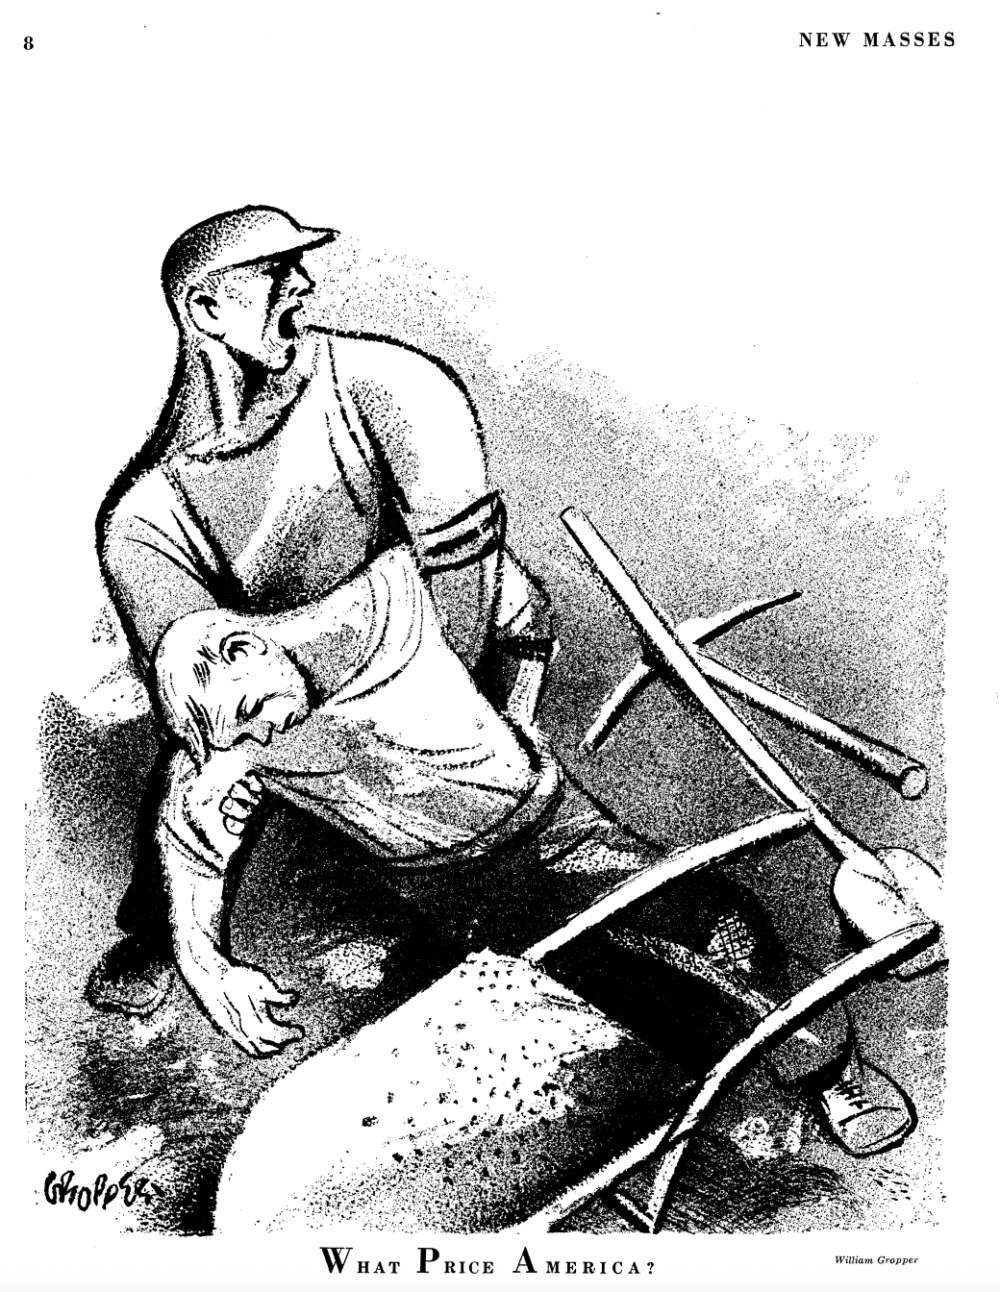 An etching in black and white of a man wearing a hat pulling another man from a pile of tools. The text below reads WHAT PRICE AMERICA?